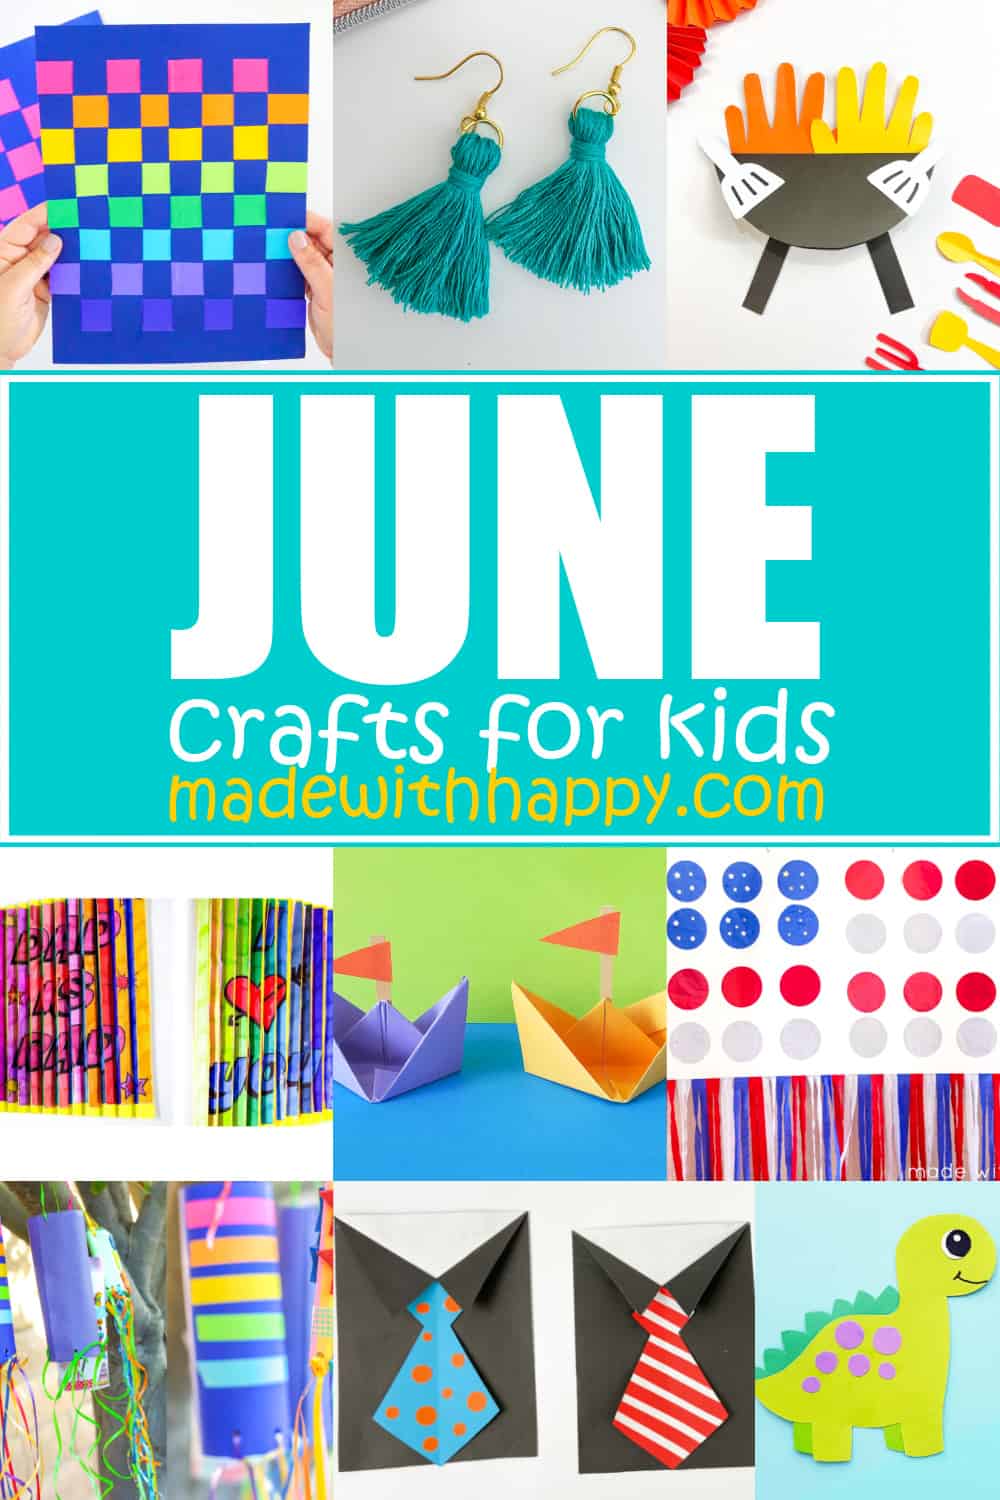 35+ Valentines Preschool Crafts - Easy Art and Craft Ideas - Natural Beach  Living